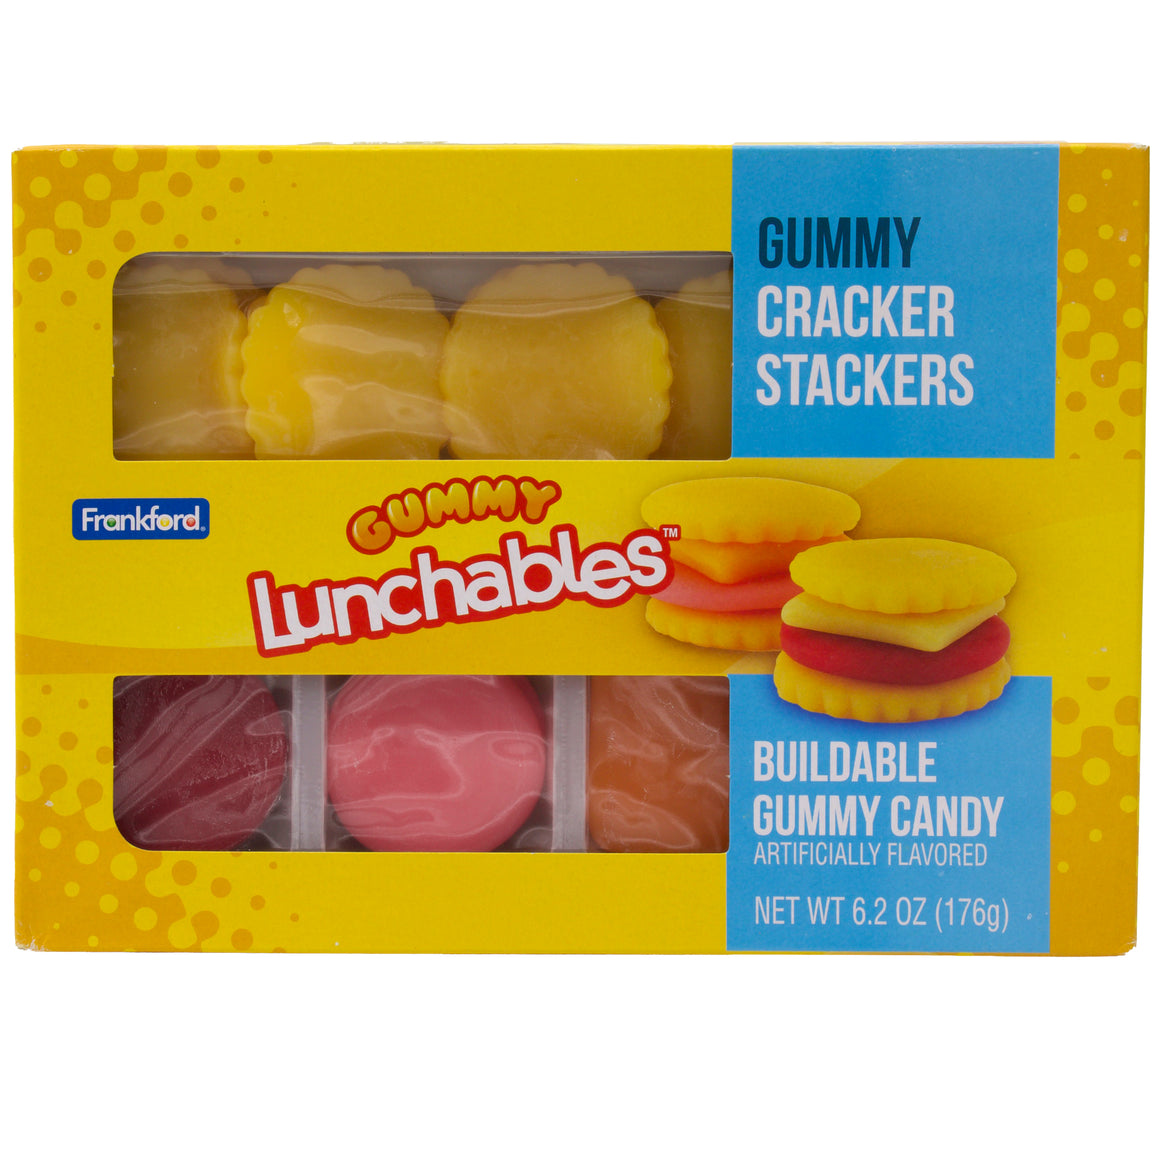 Kraft Gummy Lunchables Cracker Stackers - For fresh candy and great service, visit www.allcitycandy.com